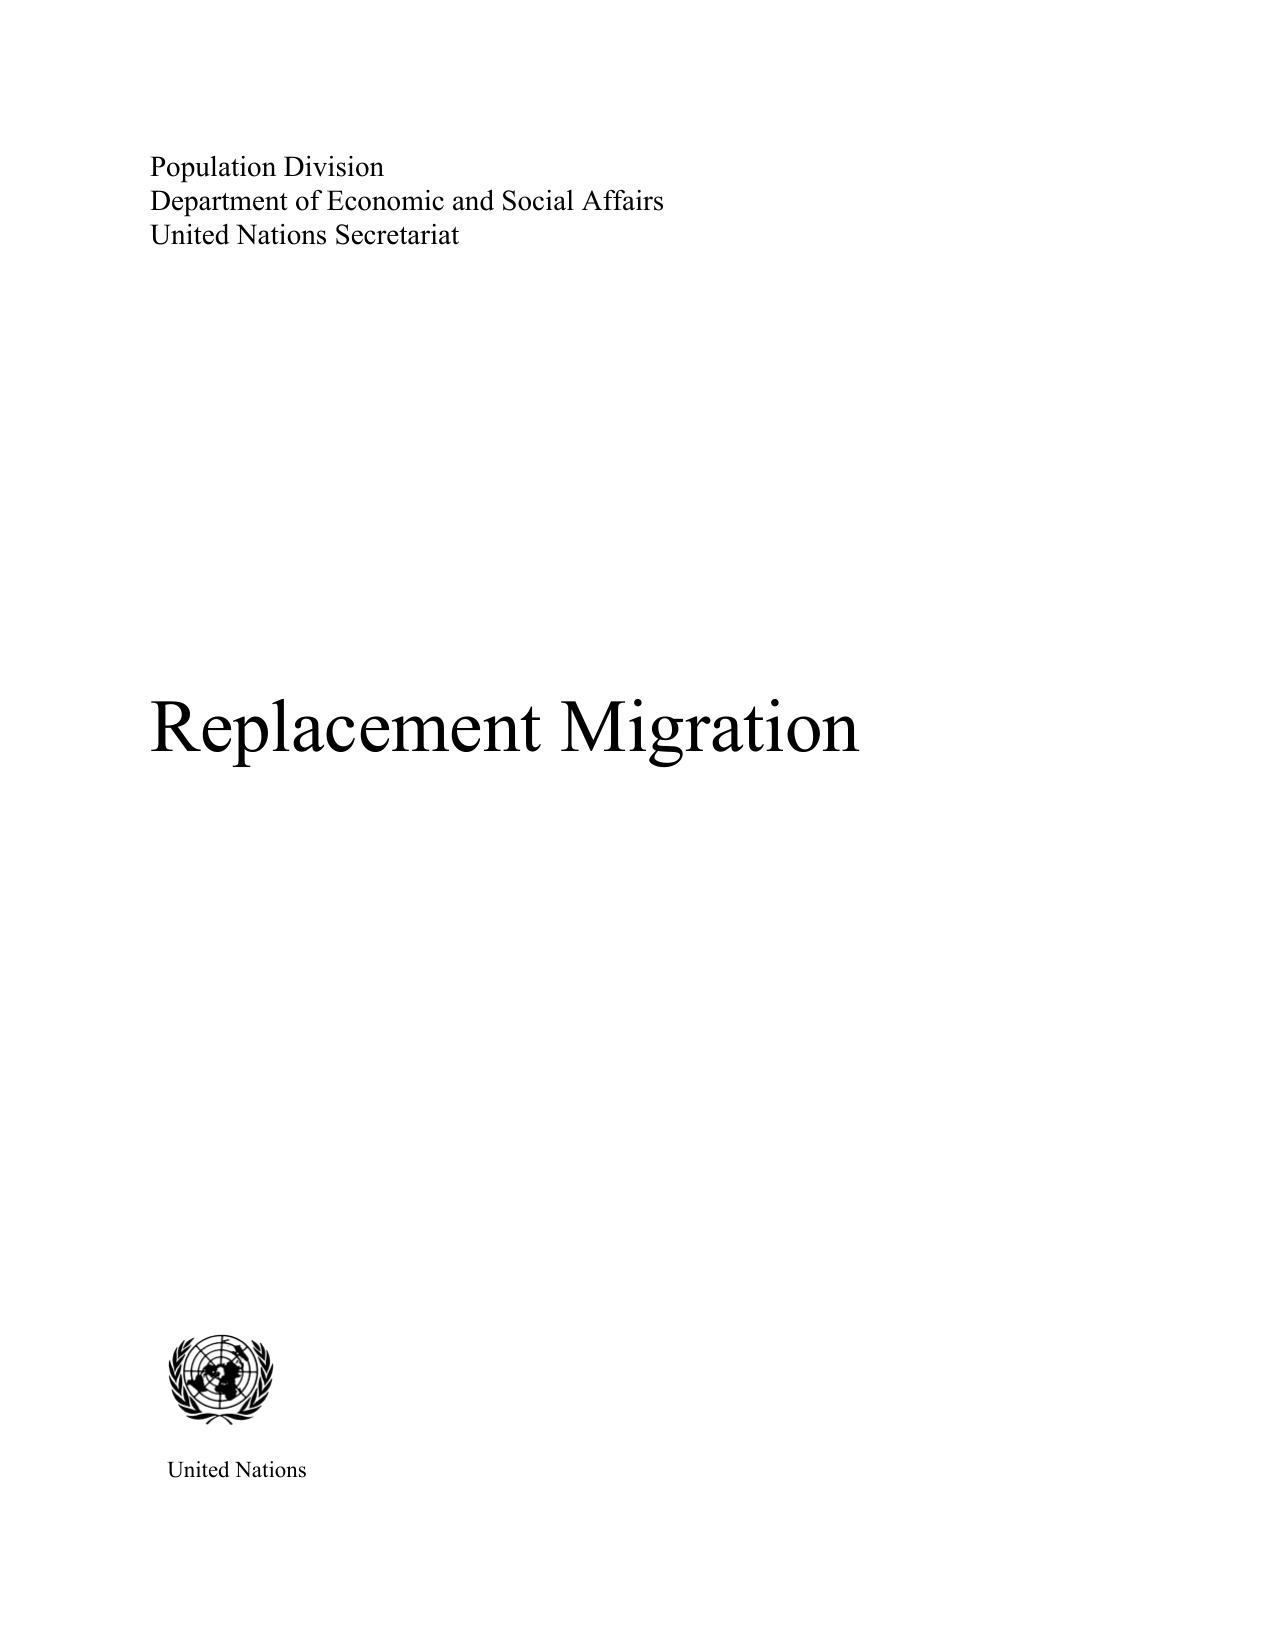 Replacement Migration: Is It a Solution to Declining and Ageing Populations